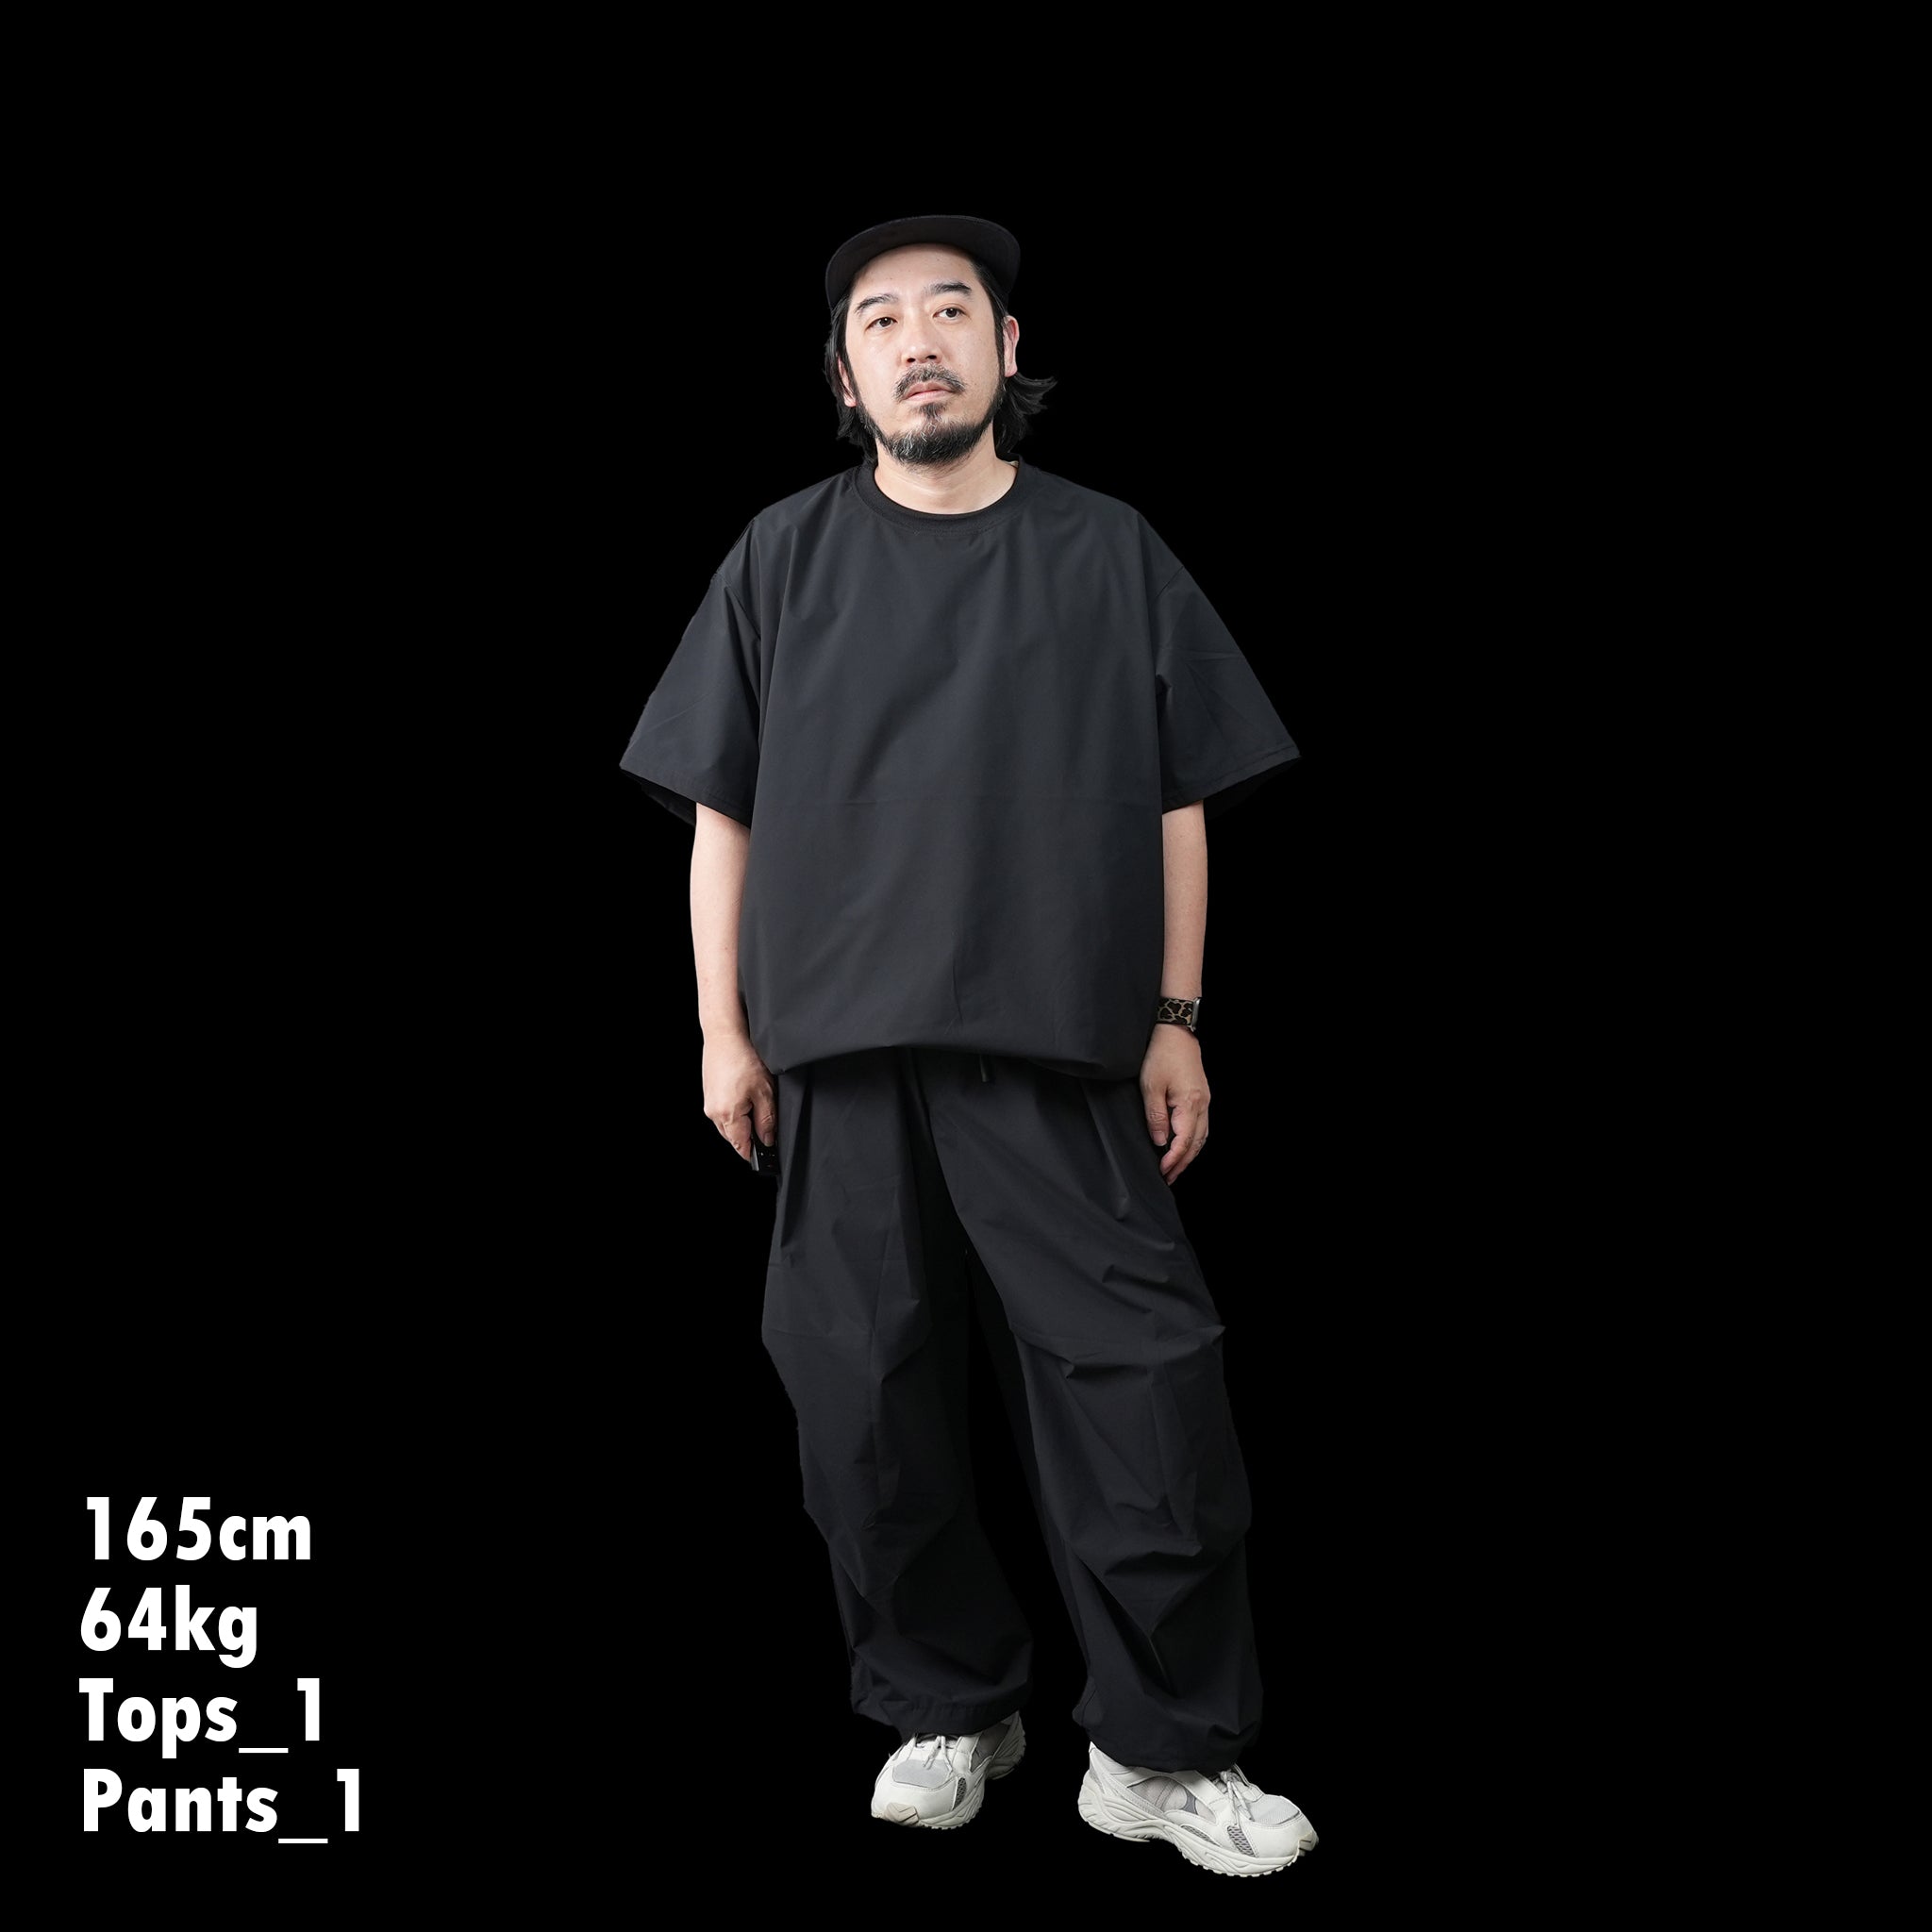 No:UN-016_SS24 | Name:WATER REPELLENT 2W STRETCH SMOCK S/S | Color:Black【UNTRACE_アントレース】